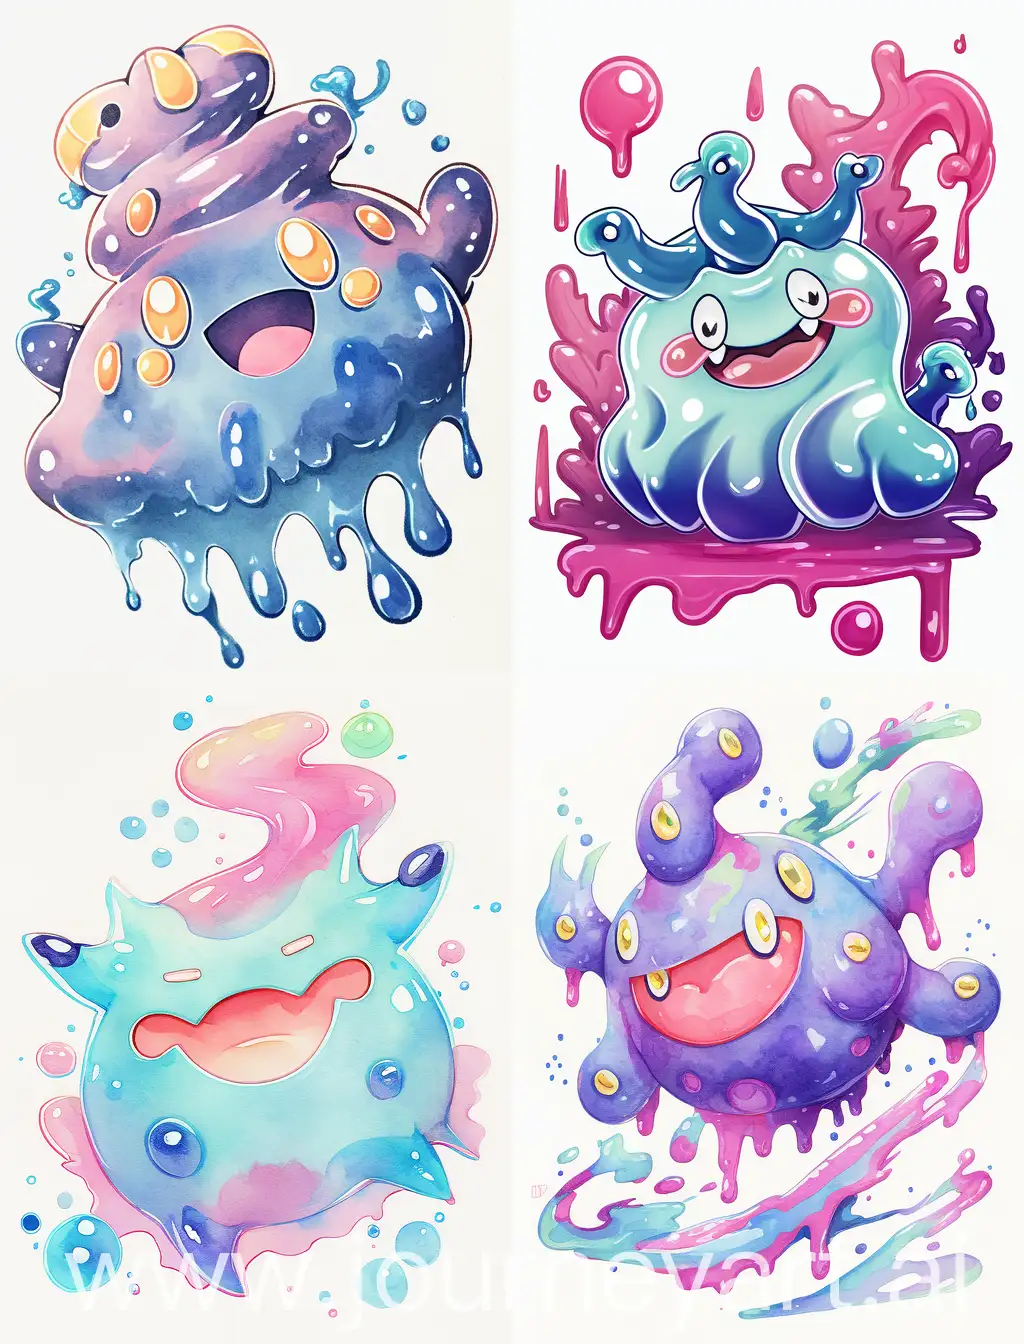 cute and friendly slime monster, uniquely shaped, watercolor anime style